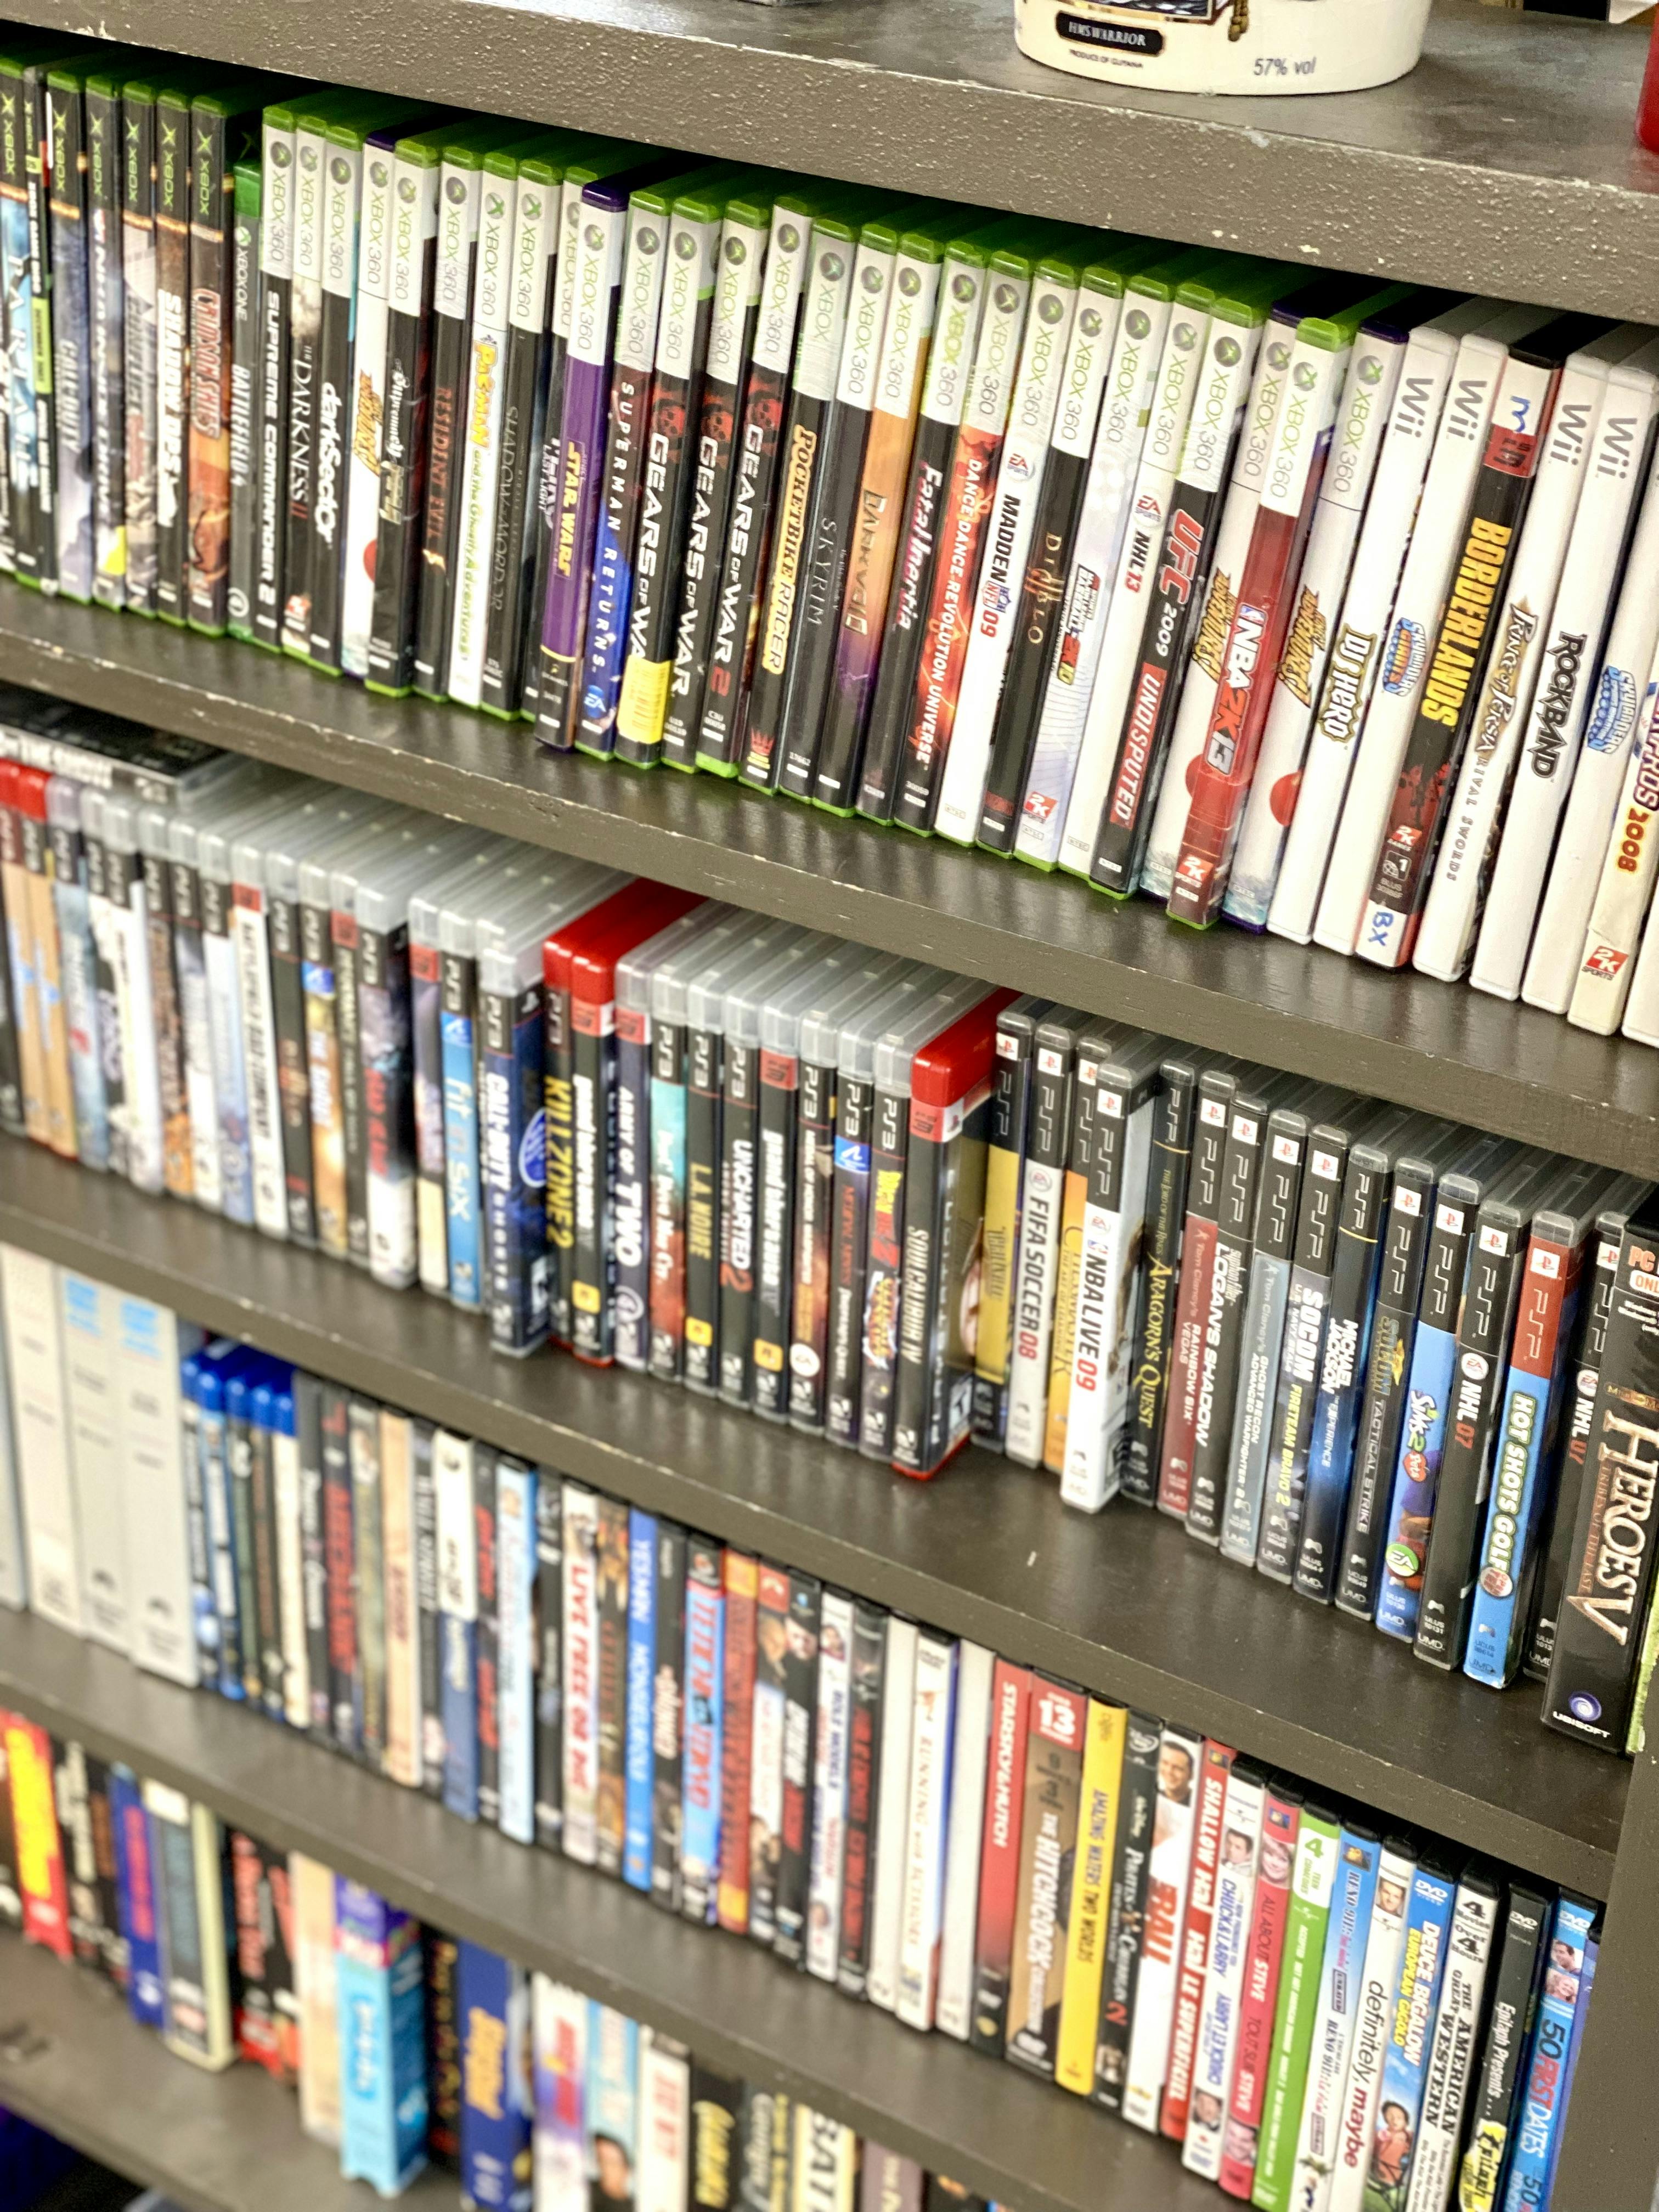 75% off all DVDs, games, videos and more in Booth AM07!